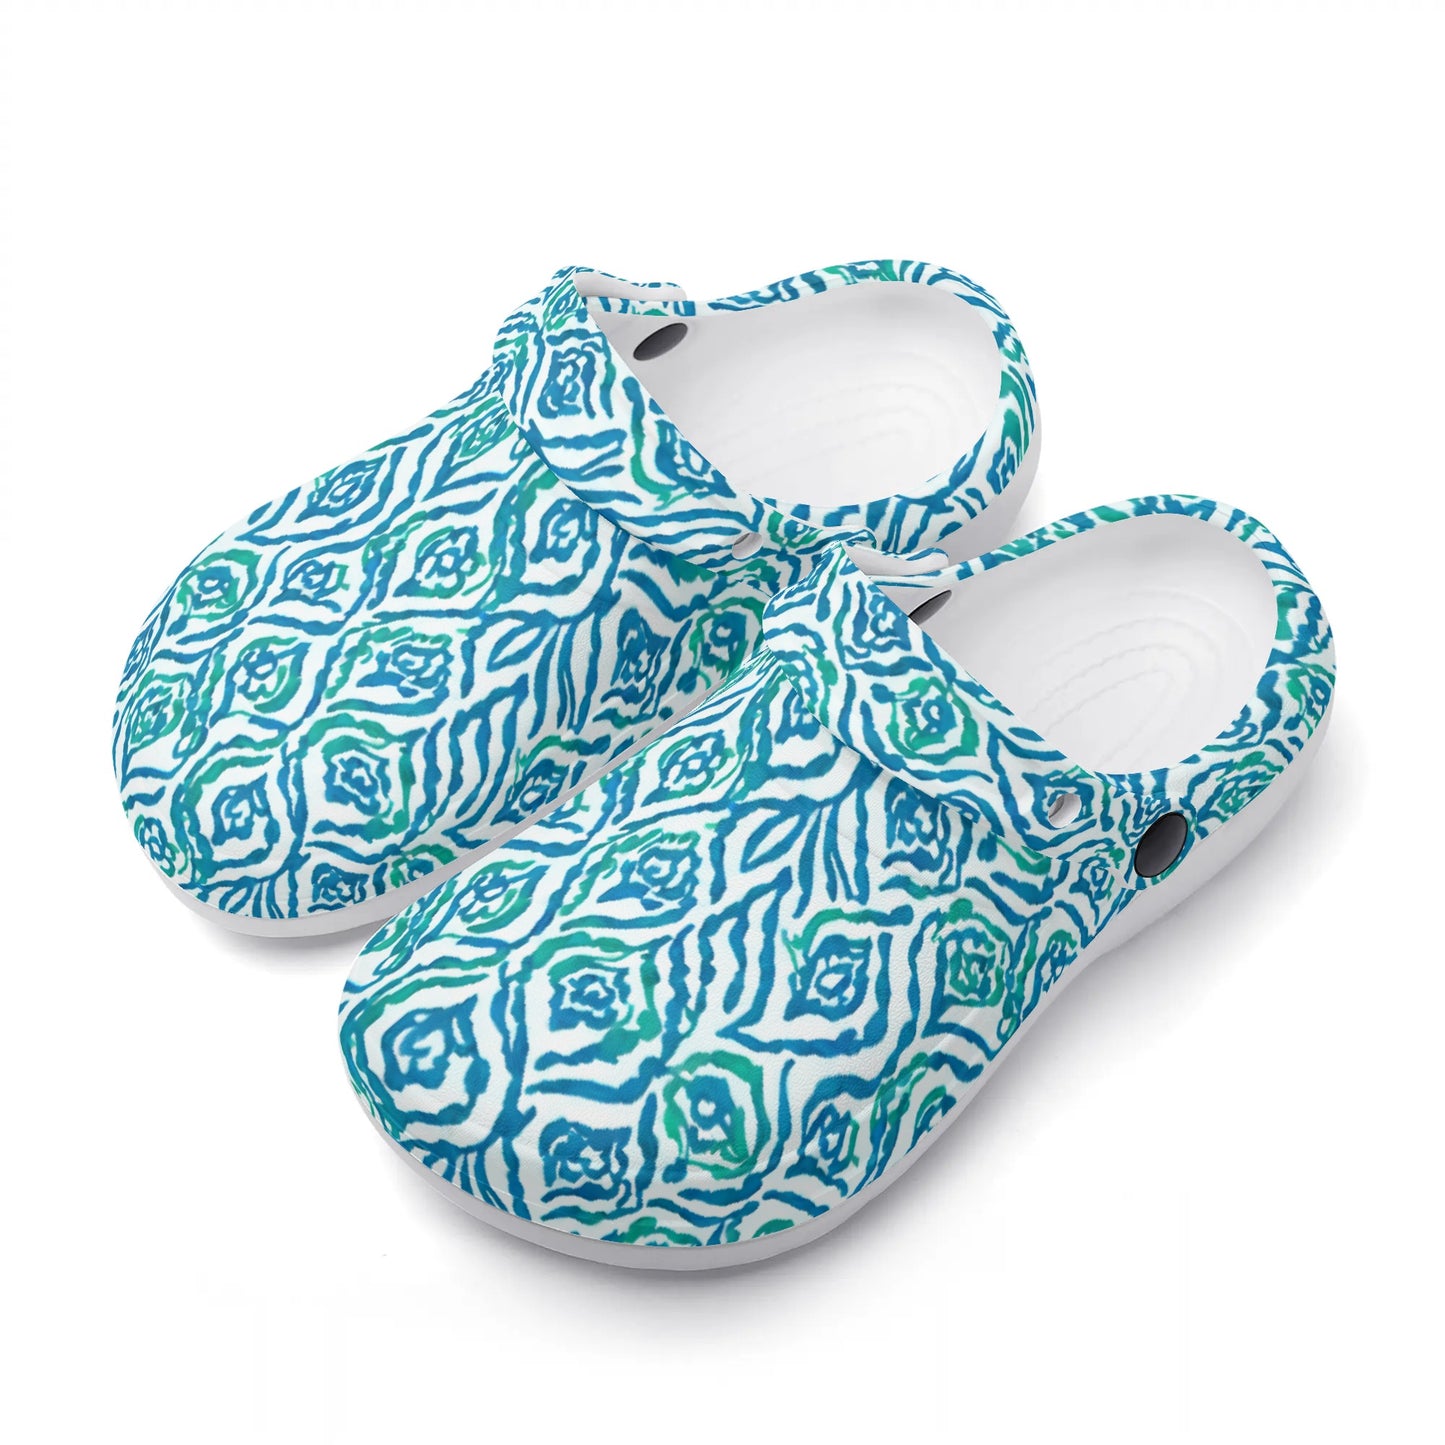 Cool Breeze Elegance: Abstract Damask Pattern in Green and Blue Casual Lightweight Slip On Nurse Style Clogs